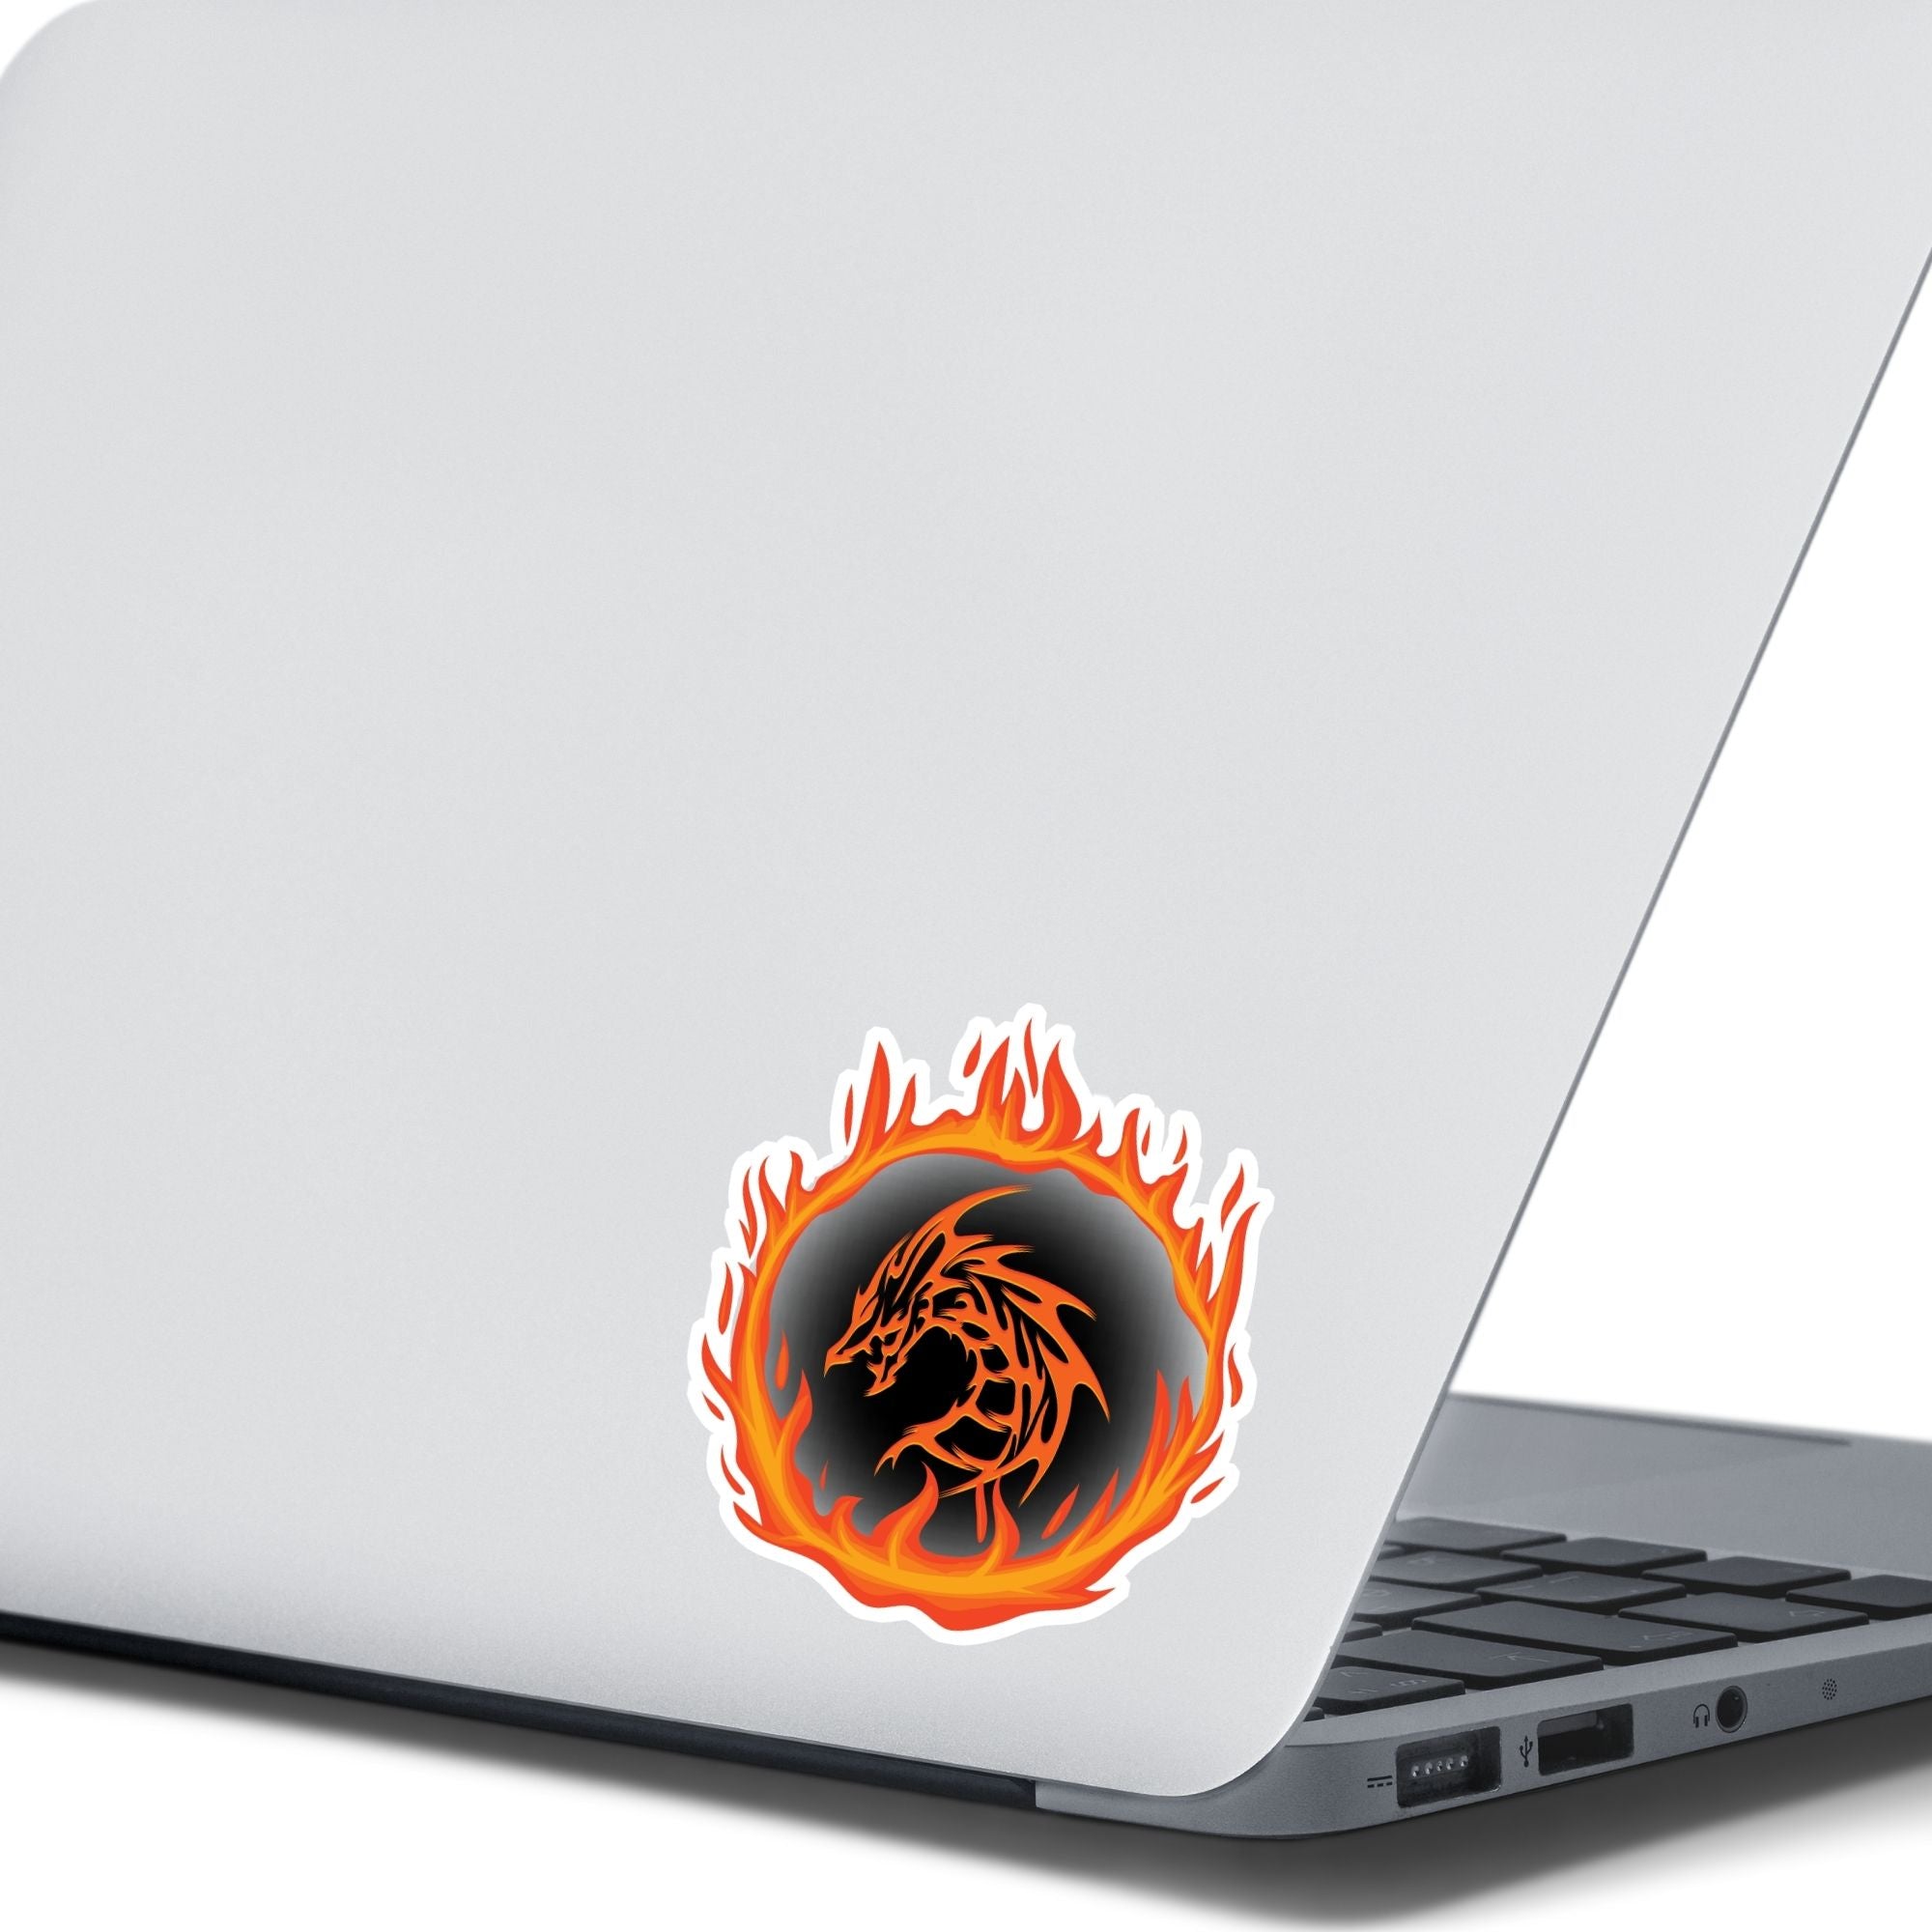 Who dares to disturb the Fire Dragon? This individual die-cut sticker features a fiery orange dragon surrounded by a ring of fire.  This image shows the Fire Dragon sticker on the back of an open laptop.